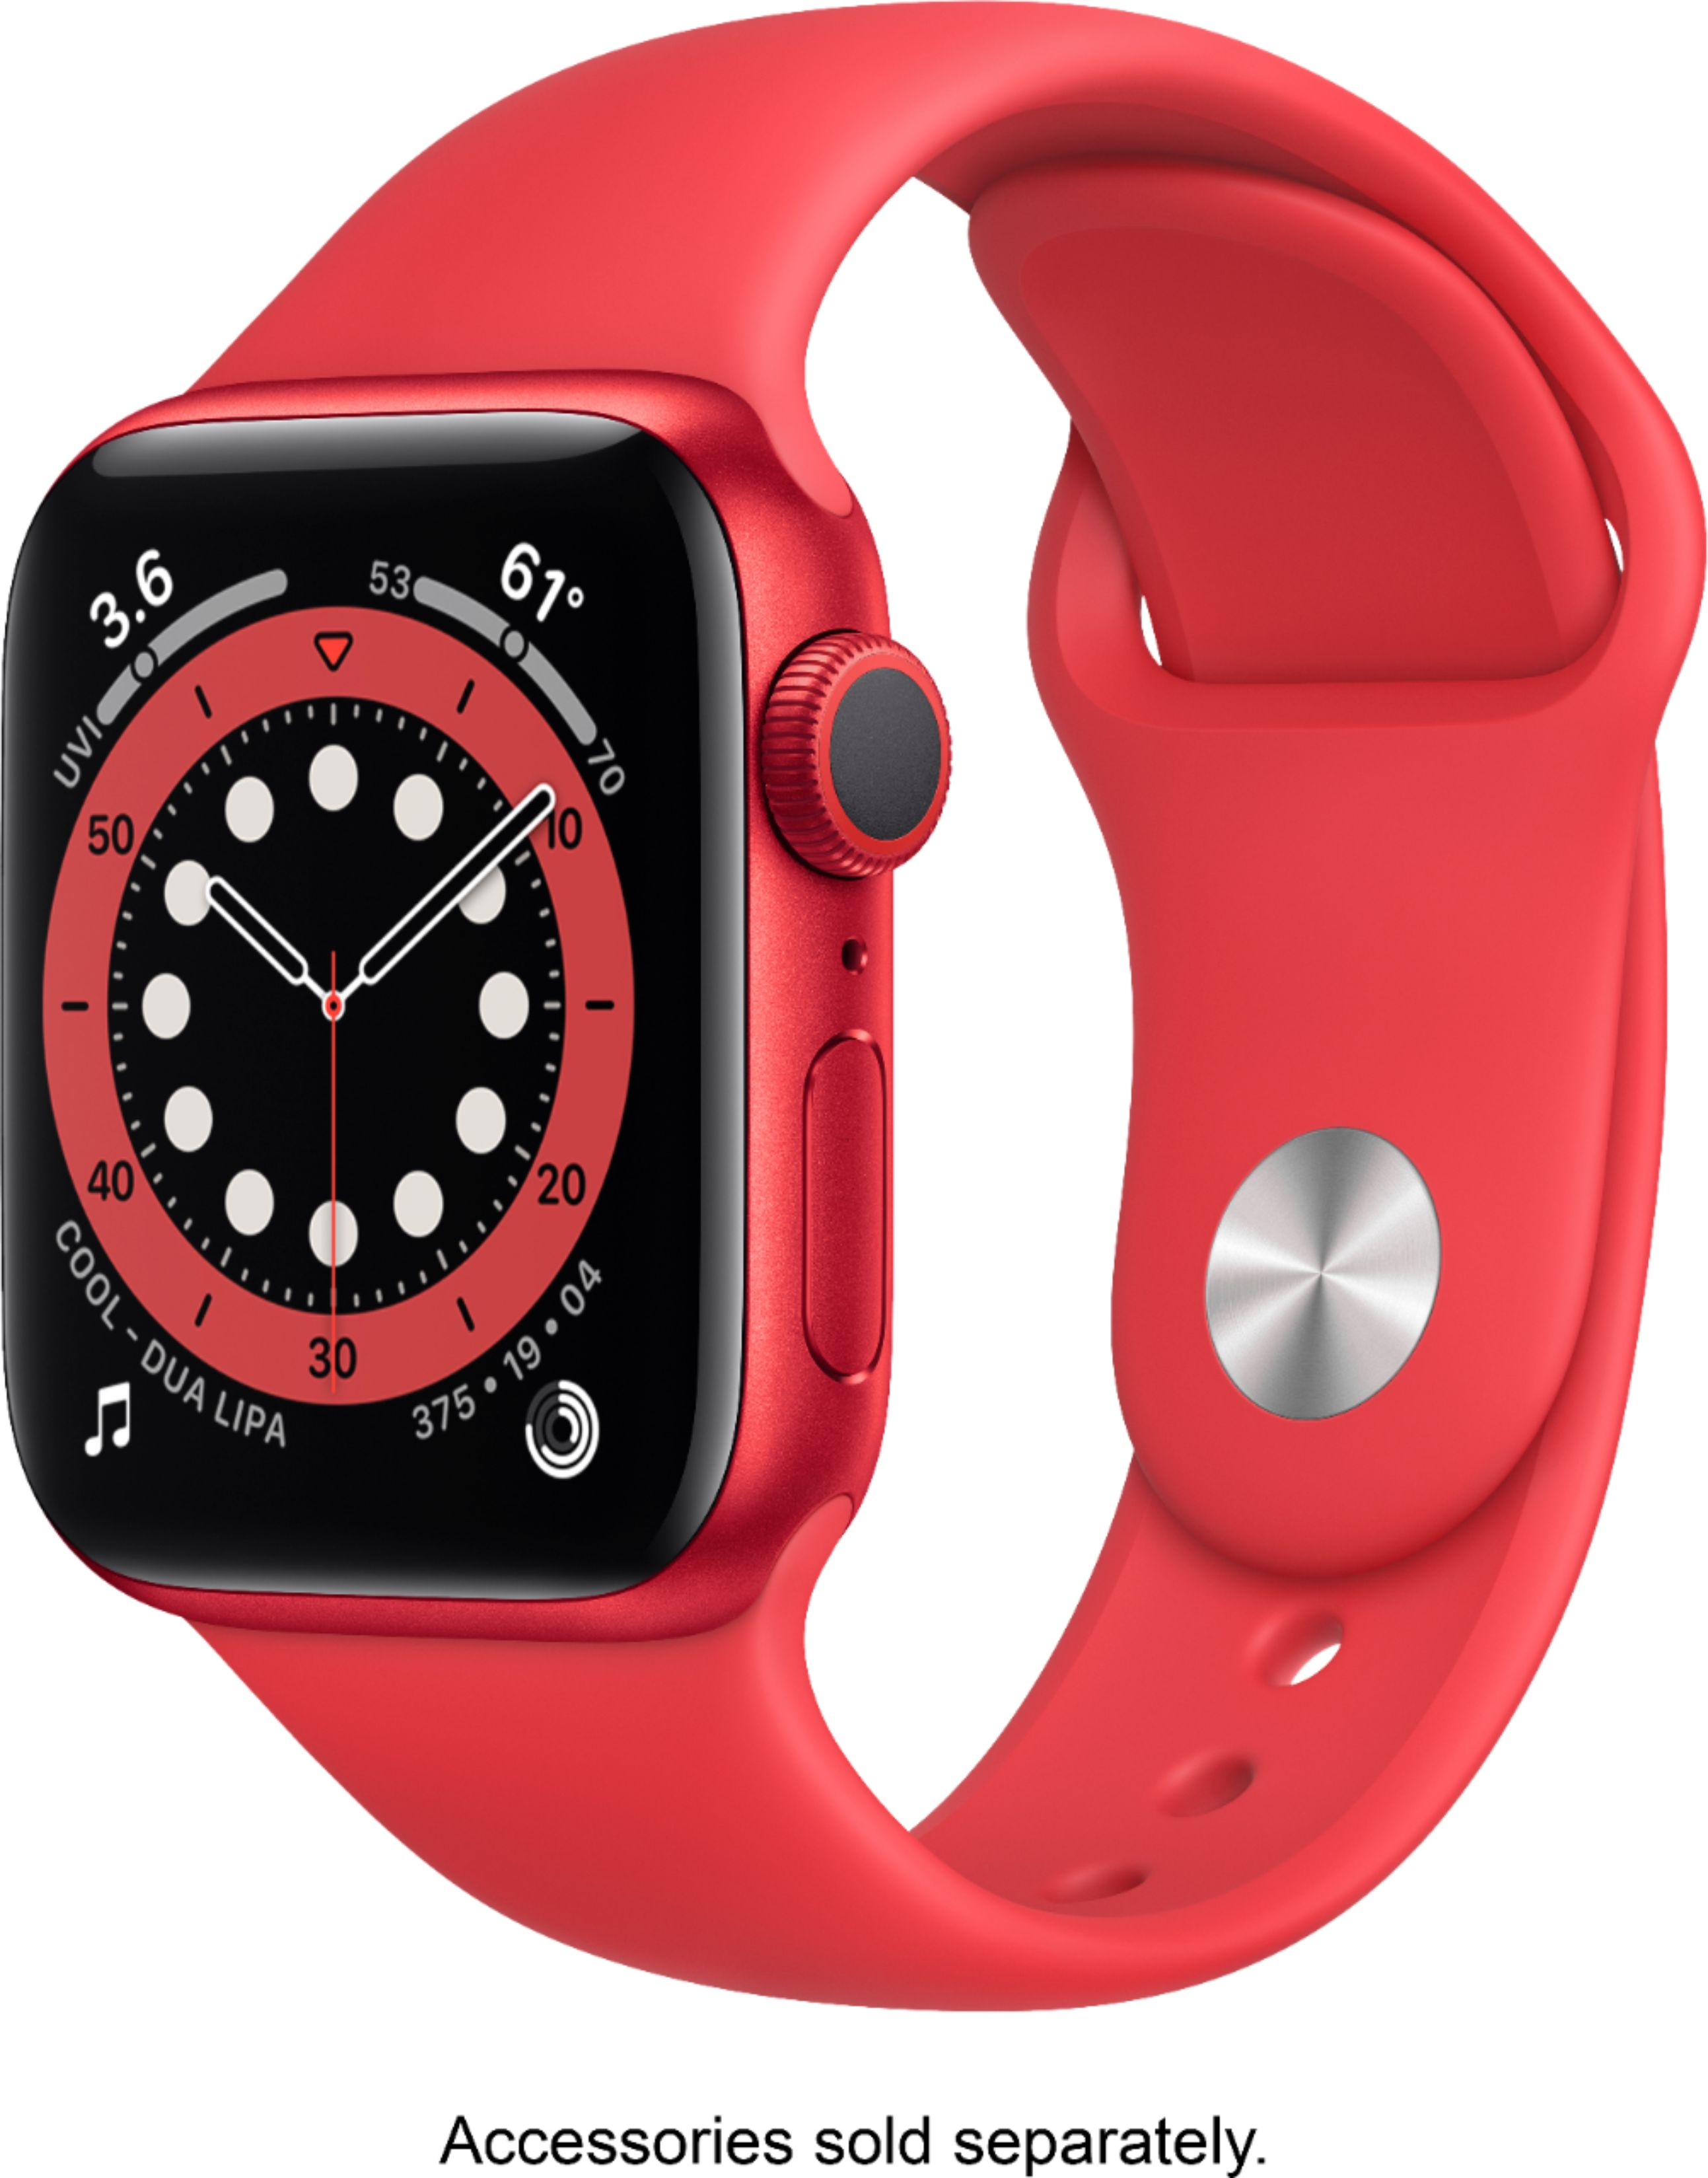 Apple Watch Series 6 (GPS) 40mm (PRODUCT)RED Aluminum Case with (PRODUCT)RED Sport Band (PRODUCT)RED M00A3LL/A - Best Buy $399